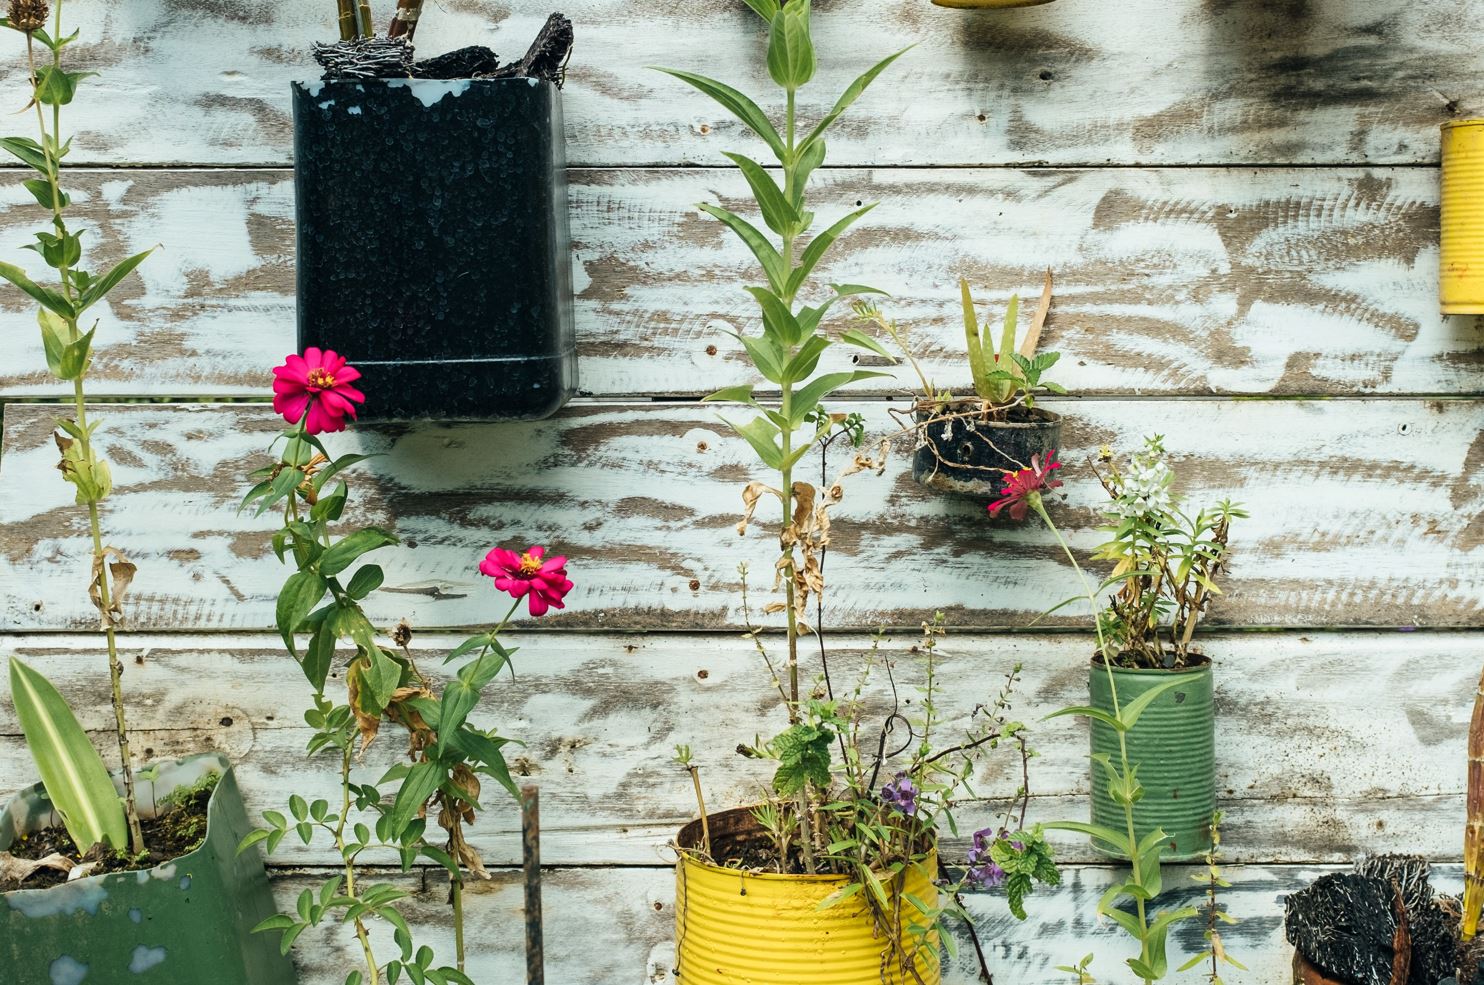 Beautiful plants potted in recycled materials